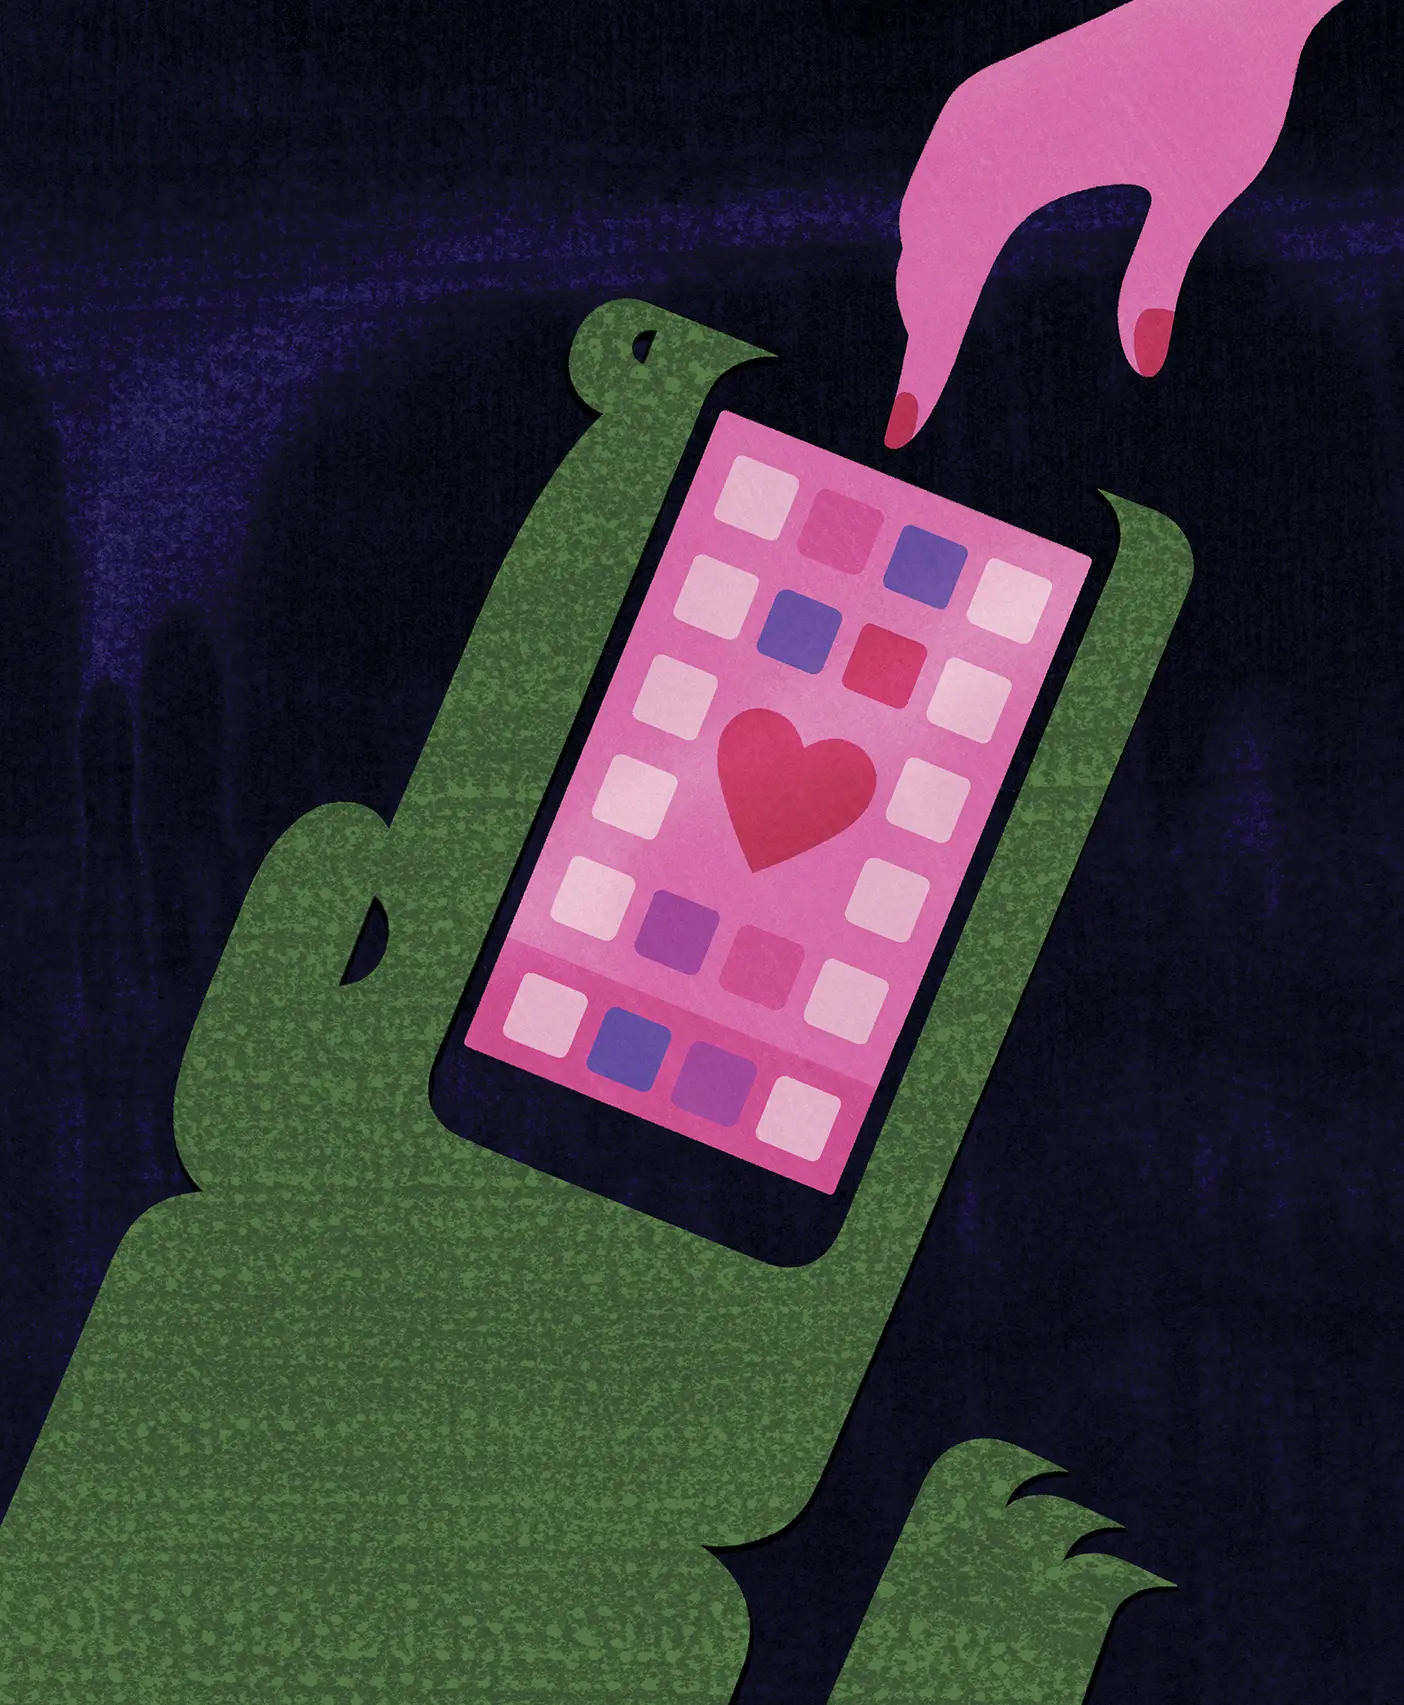 An illustrated crocodile with a smartphone in its mouth and a pink hand reaching down to access a dating app.